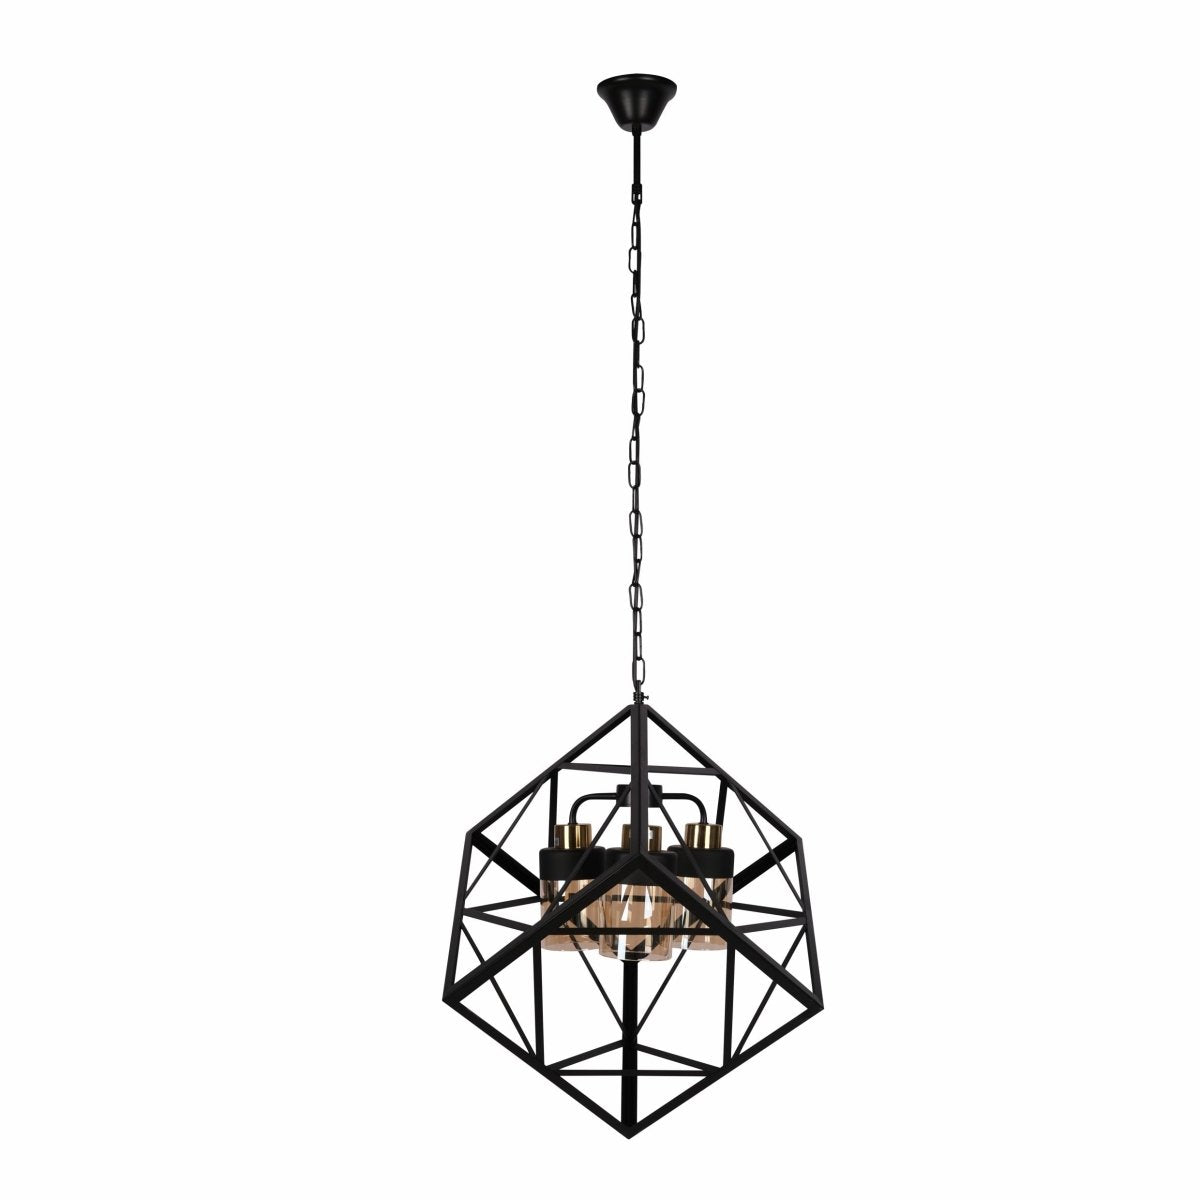 Main image of Amber Glass Black Metal Cube Body Chandelier with 3xE27 Fitting | TEKLED 159-17400